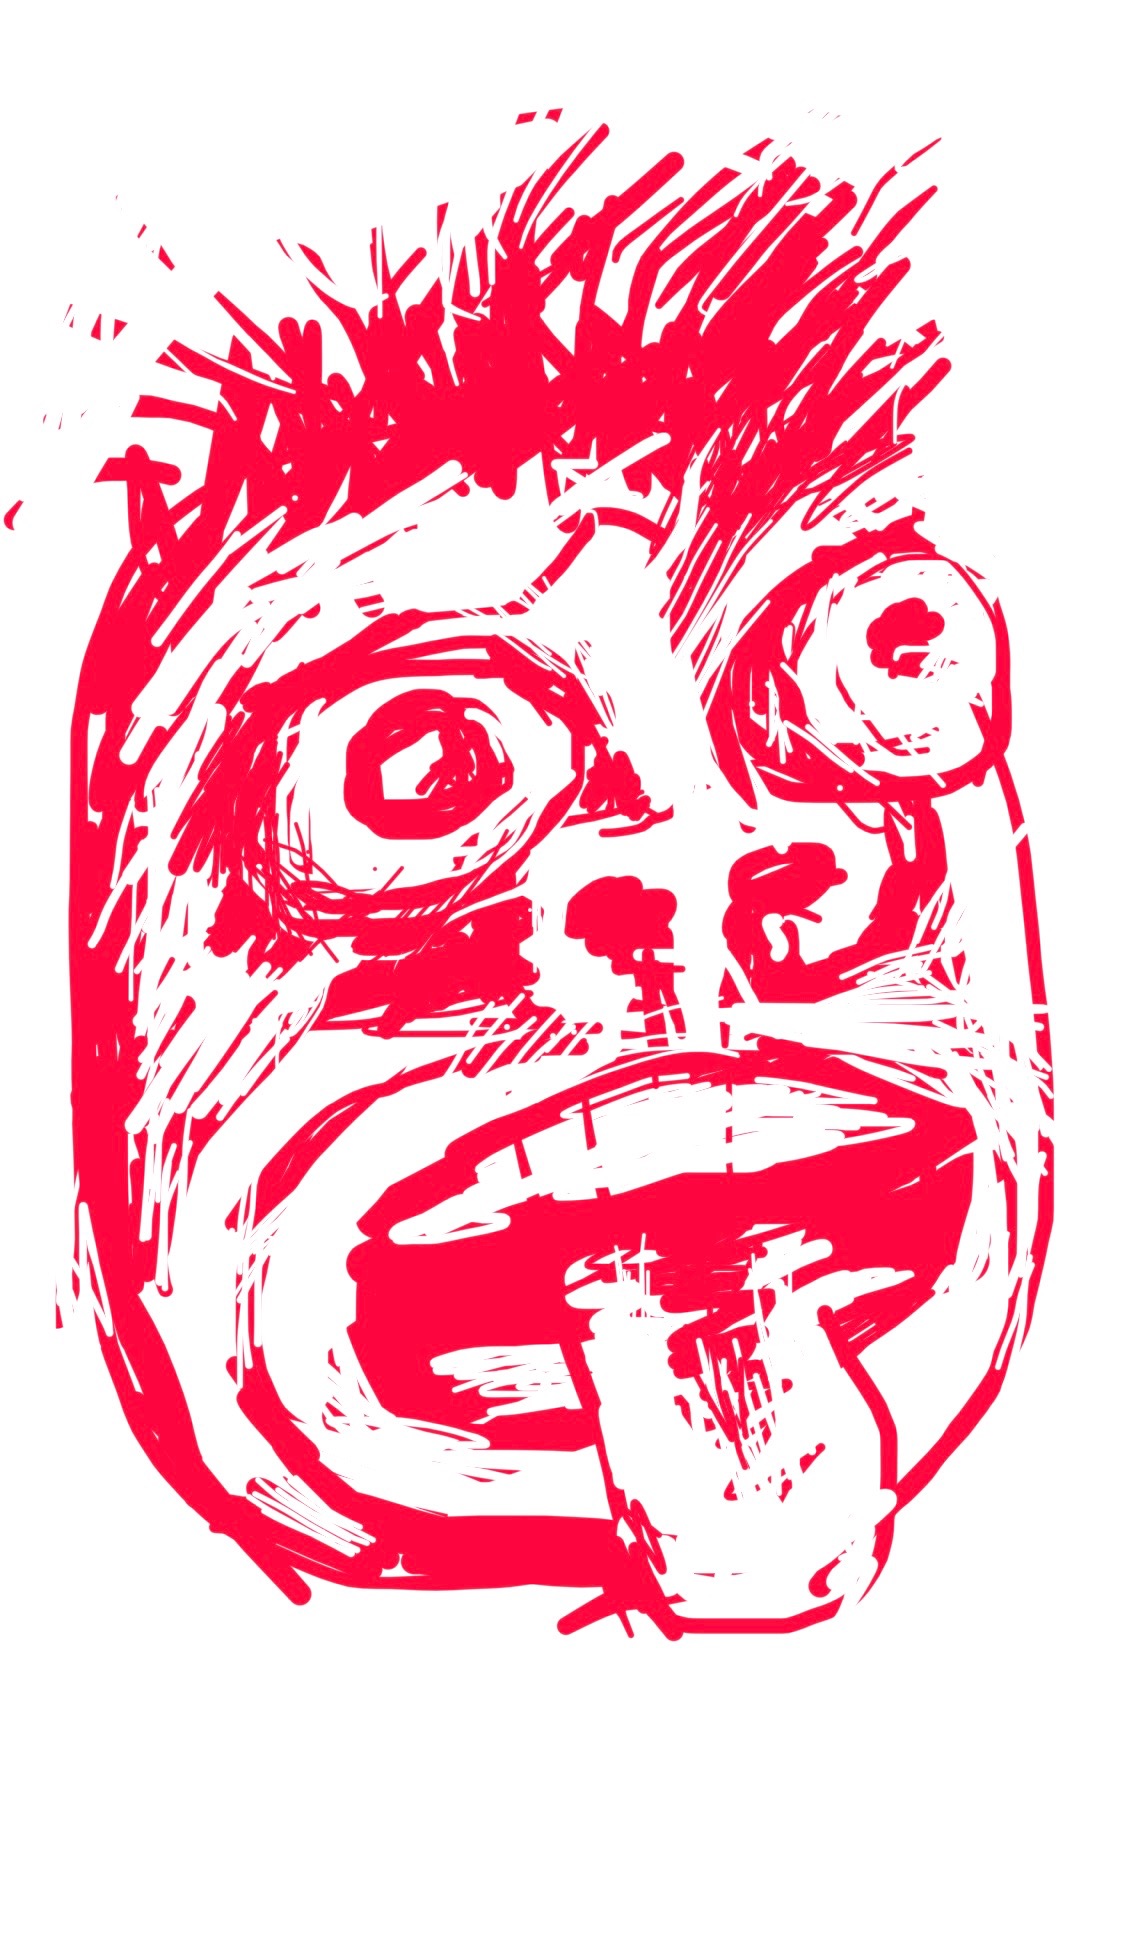 A cartoon drawing of a bug-eyed person sticking out their tongue